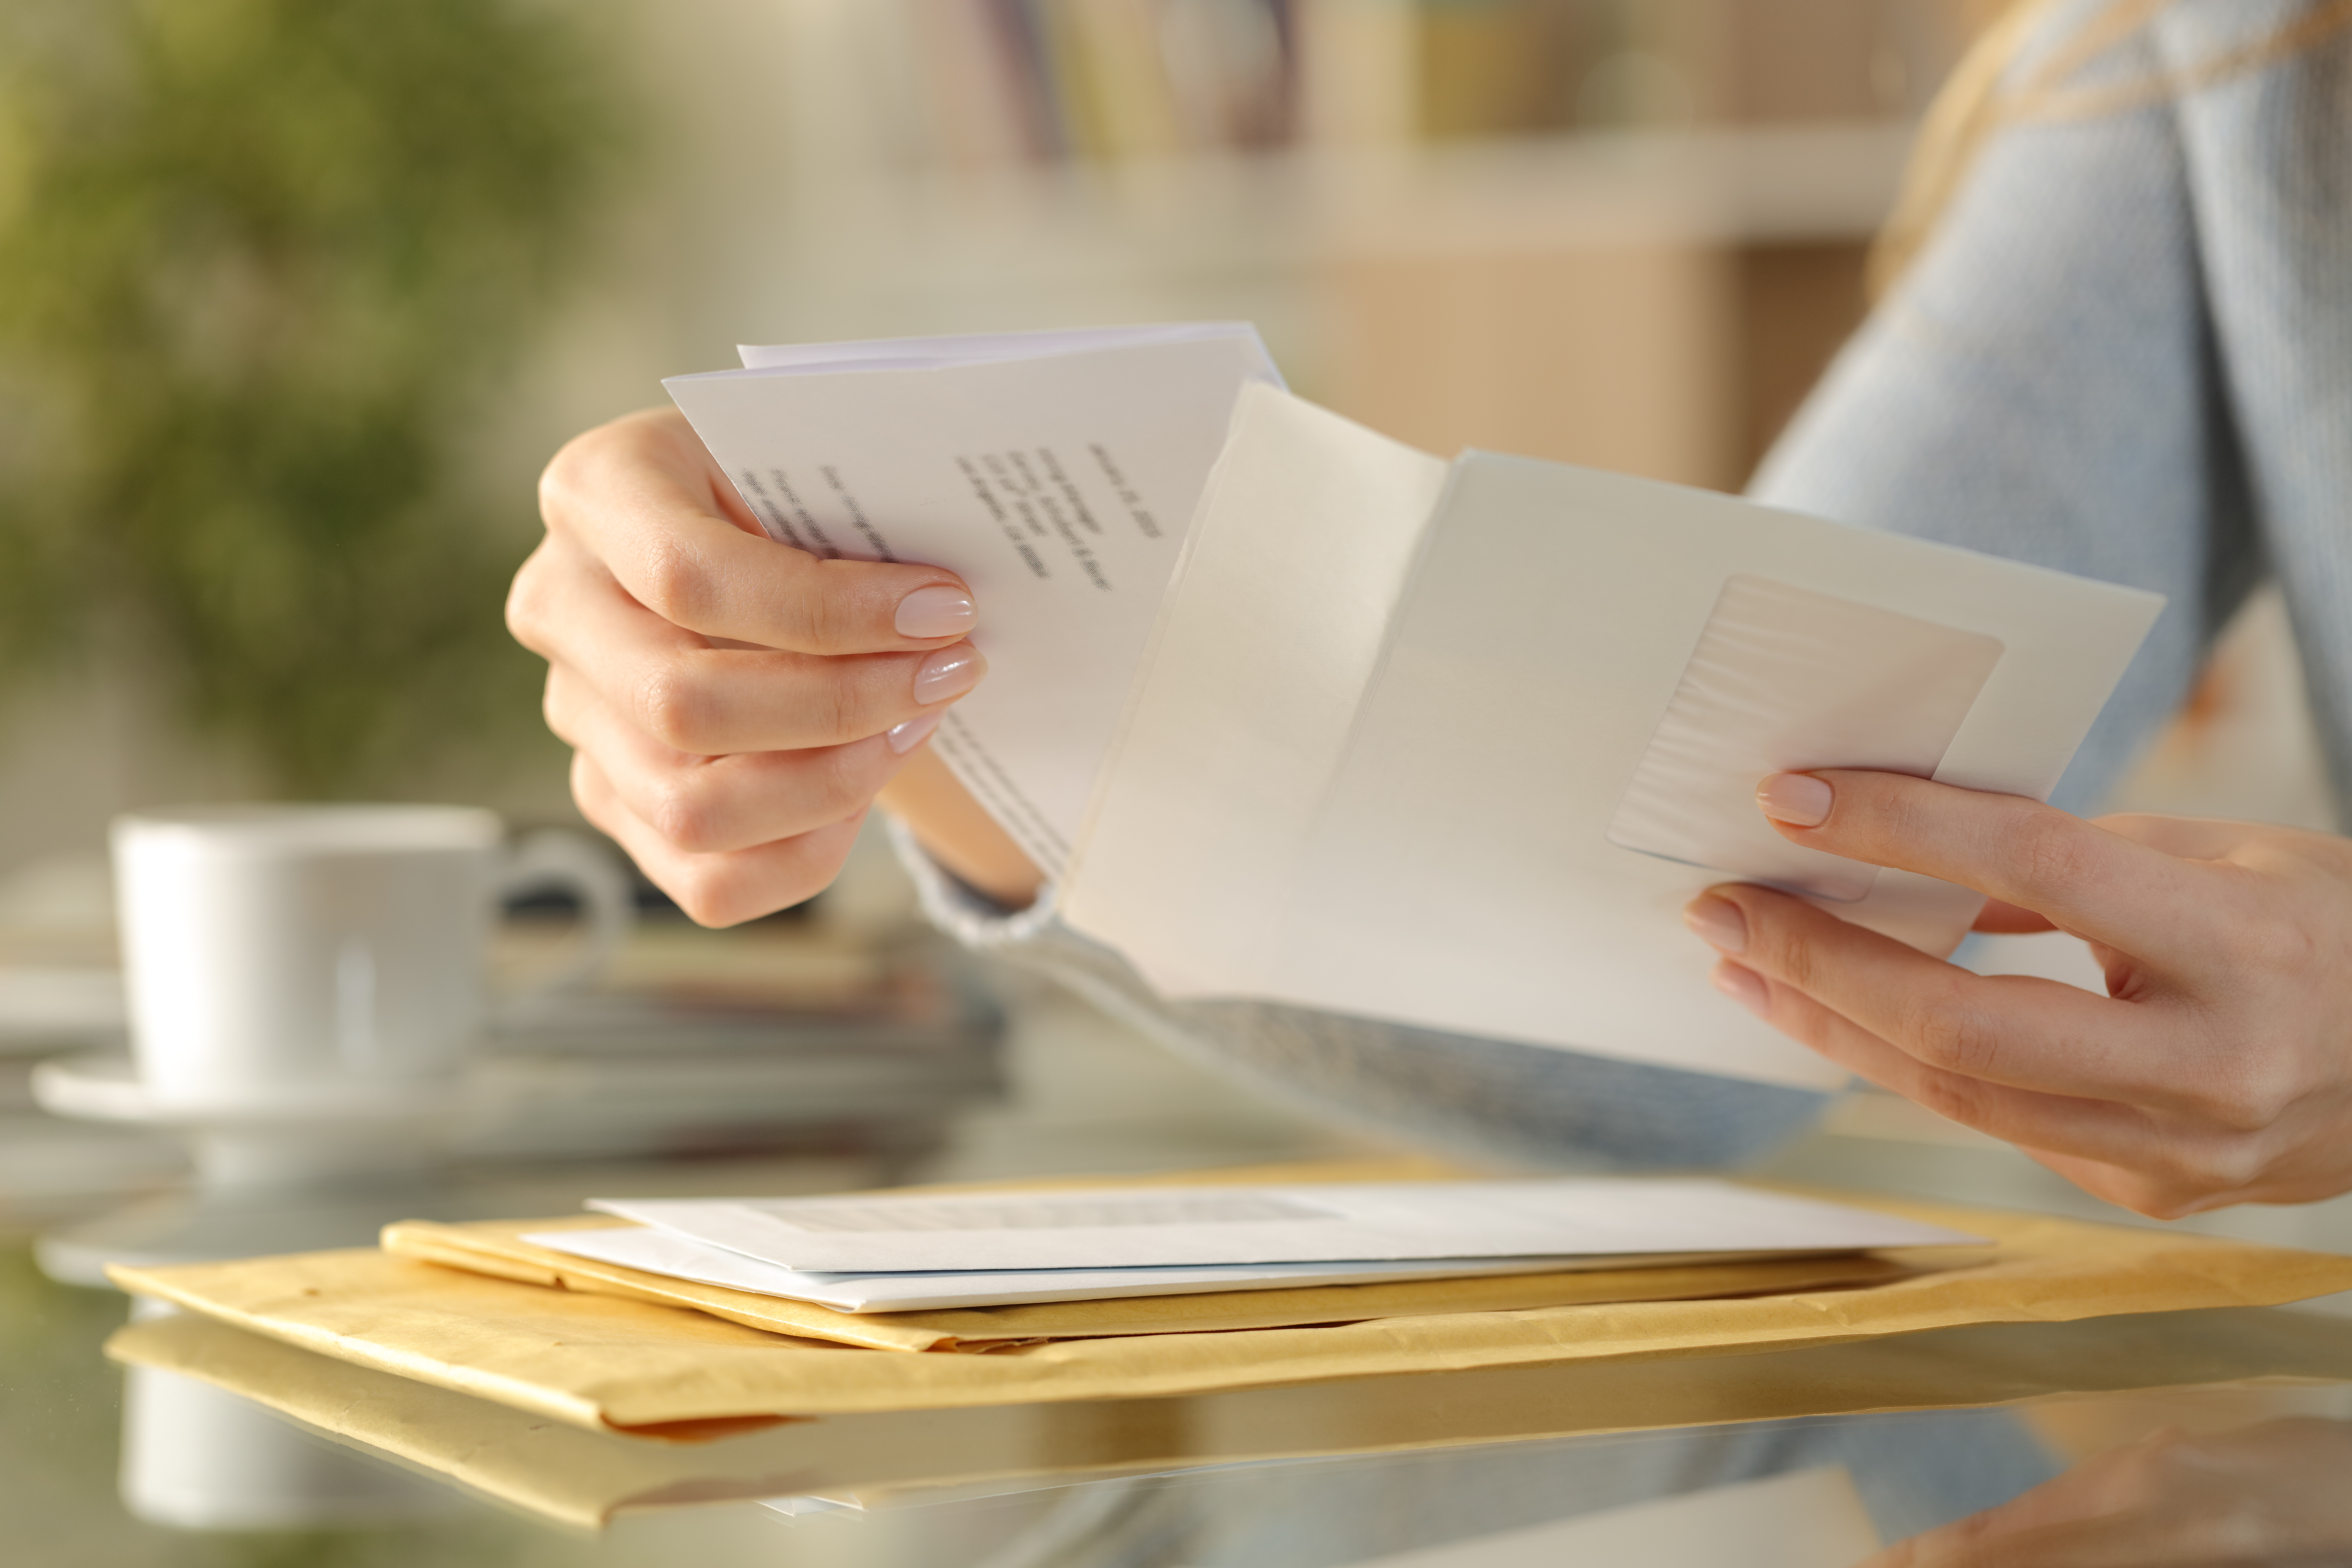 A person opening an envelope | Source: Pexels